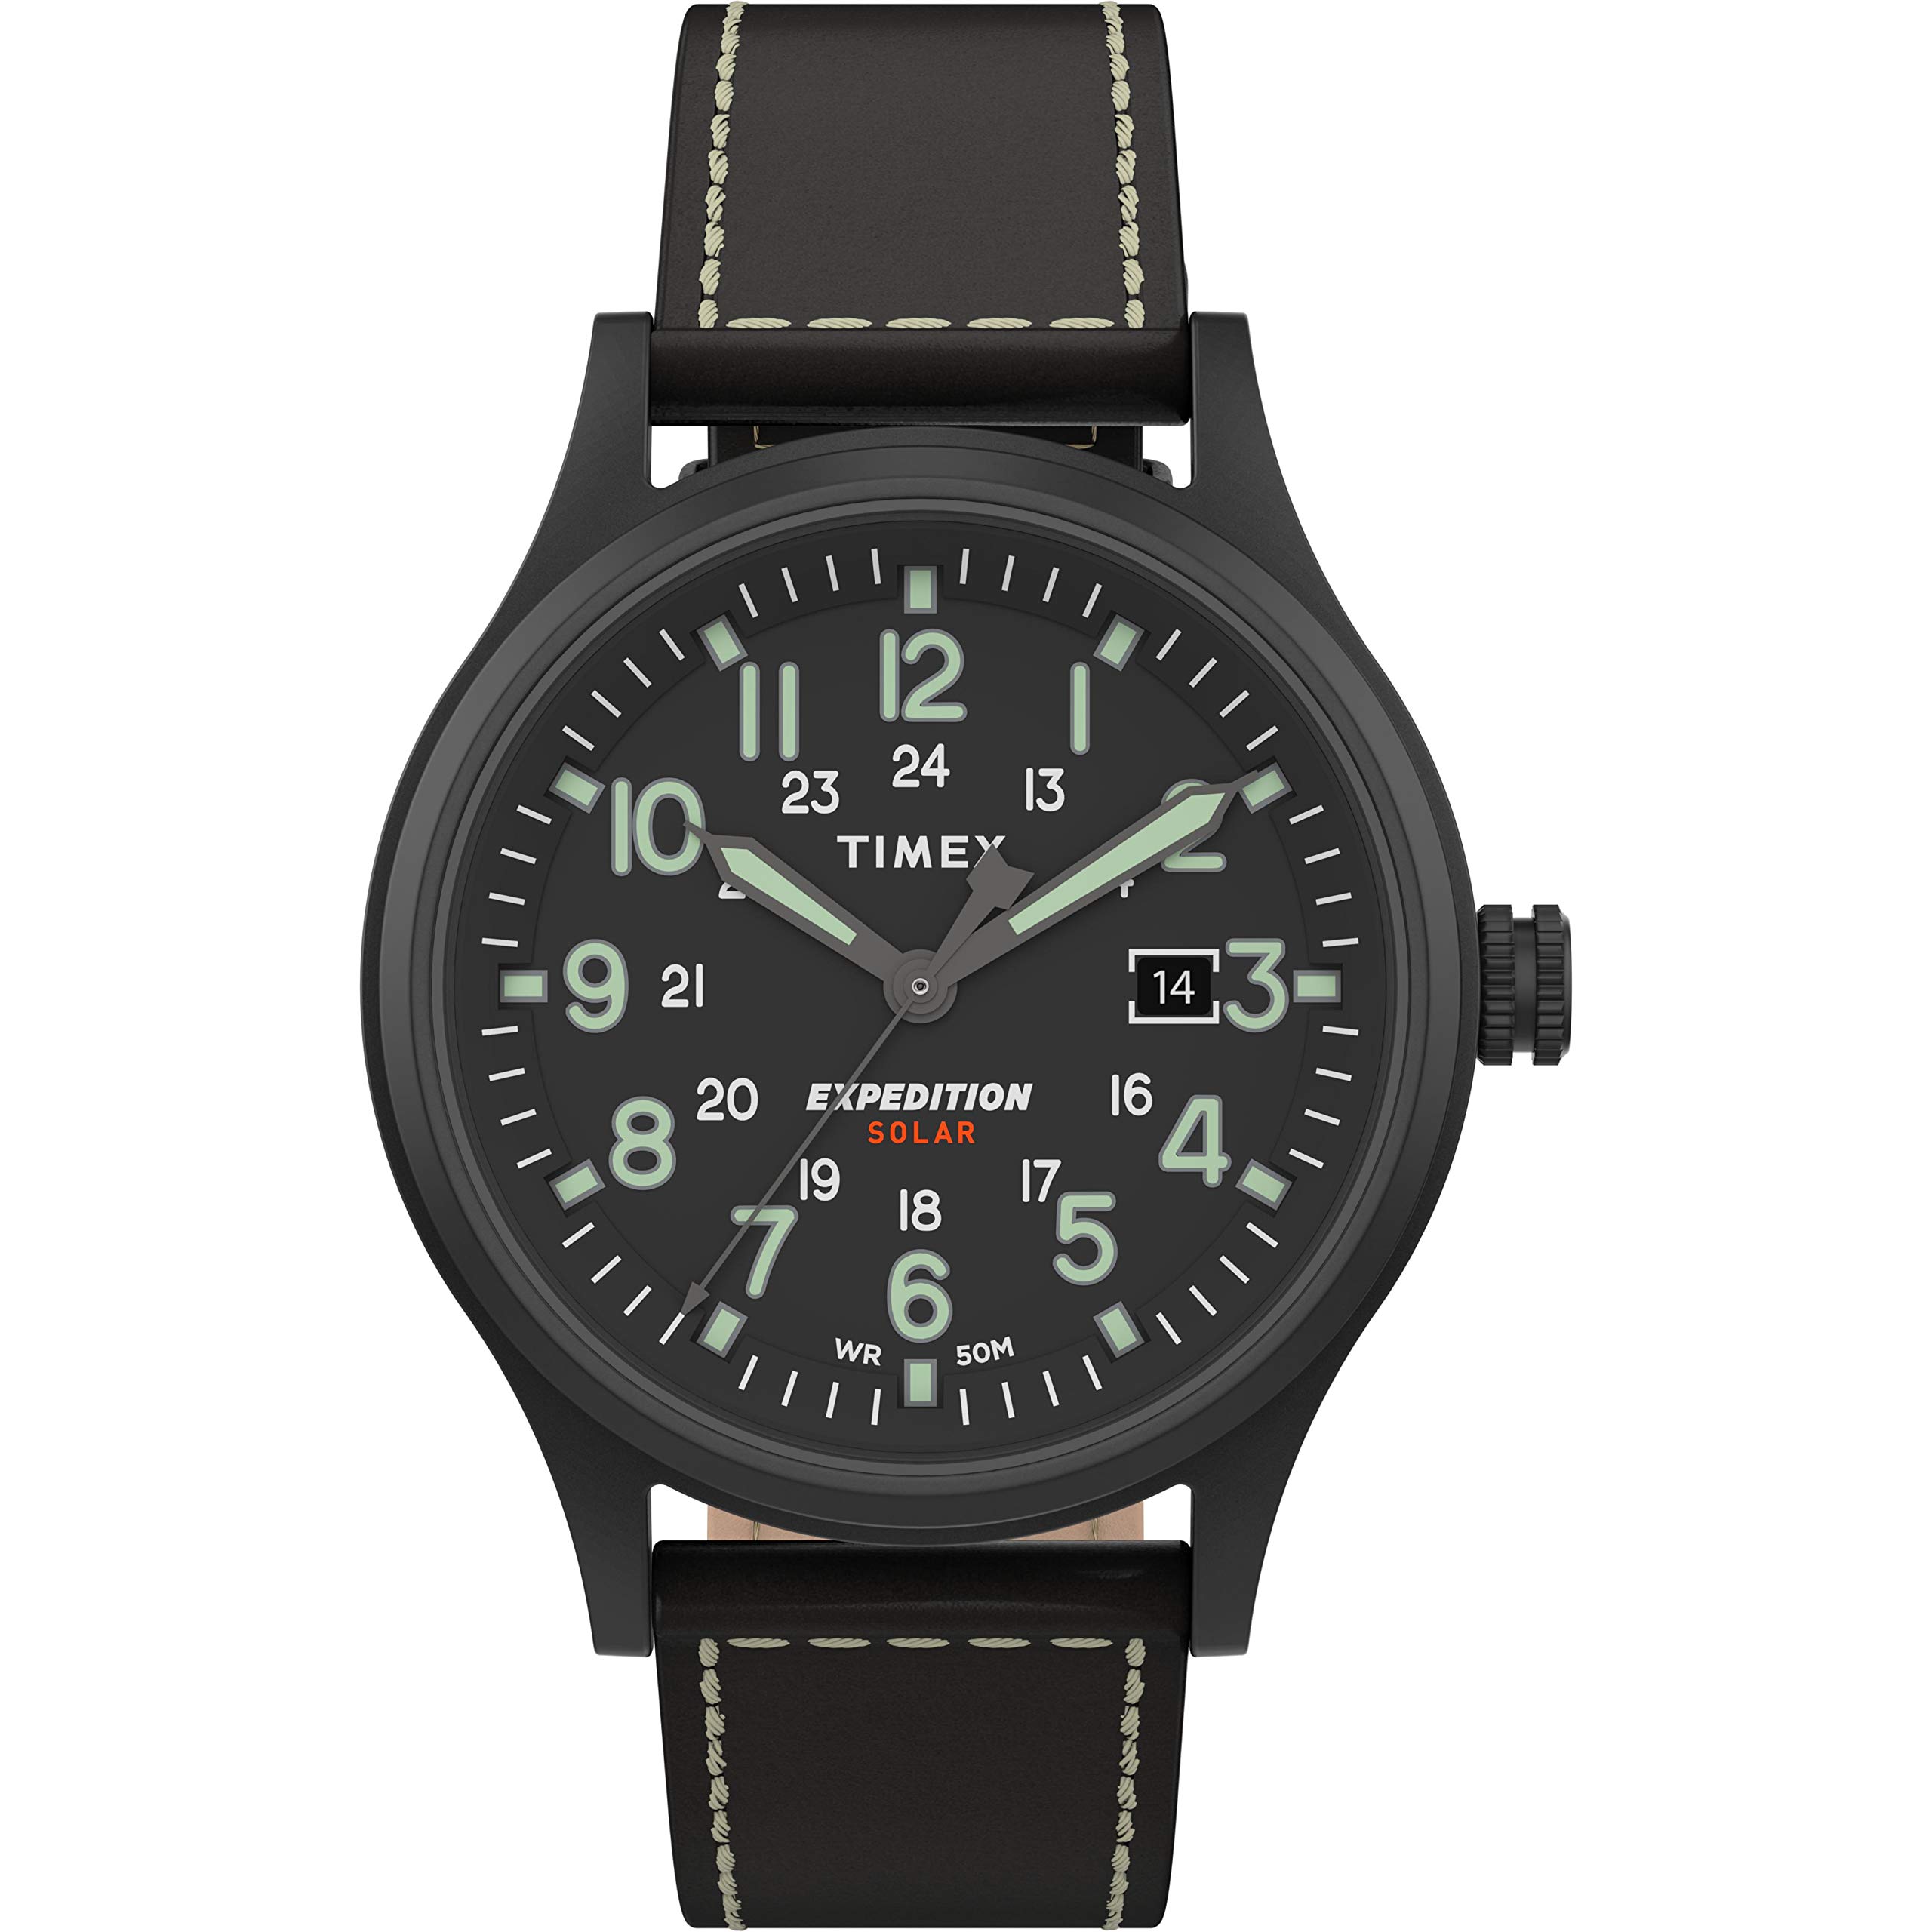 Timex Men's TW4B18500 9J Expedition Scout Solar 40mm Black Leather Strap Watch